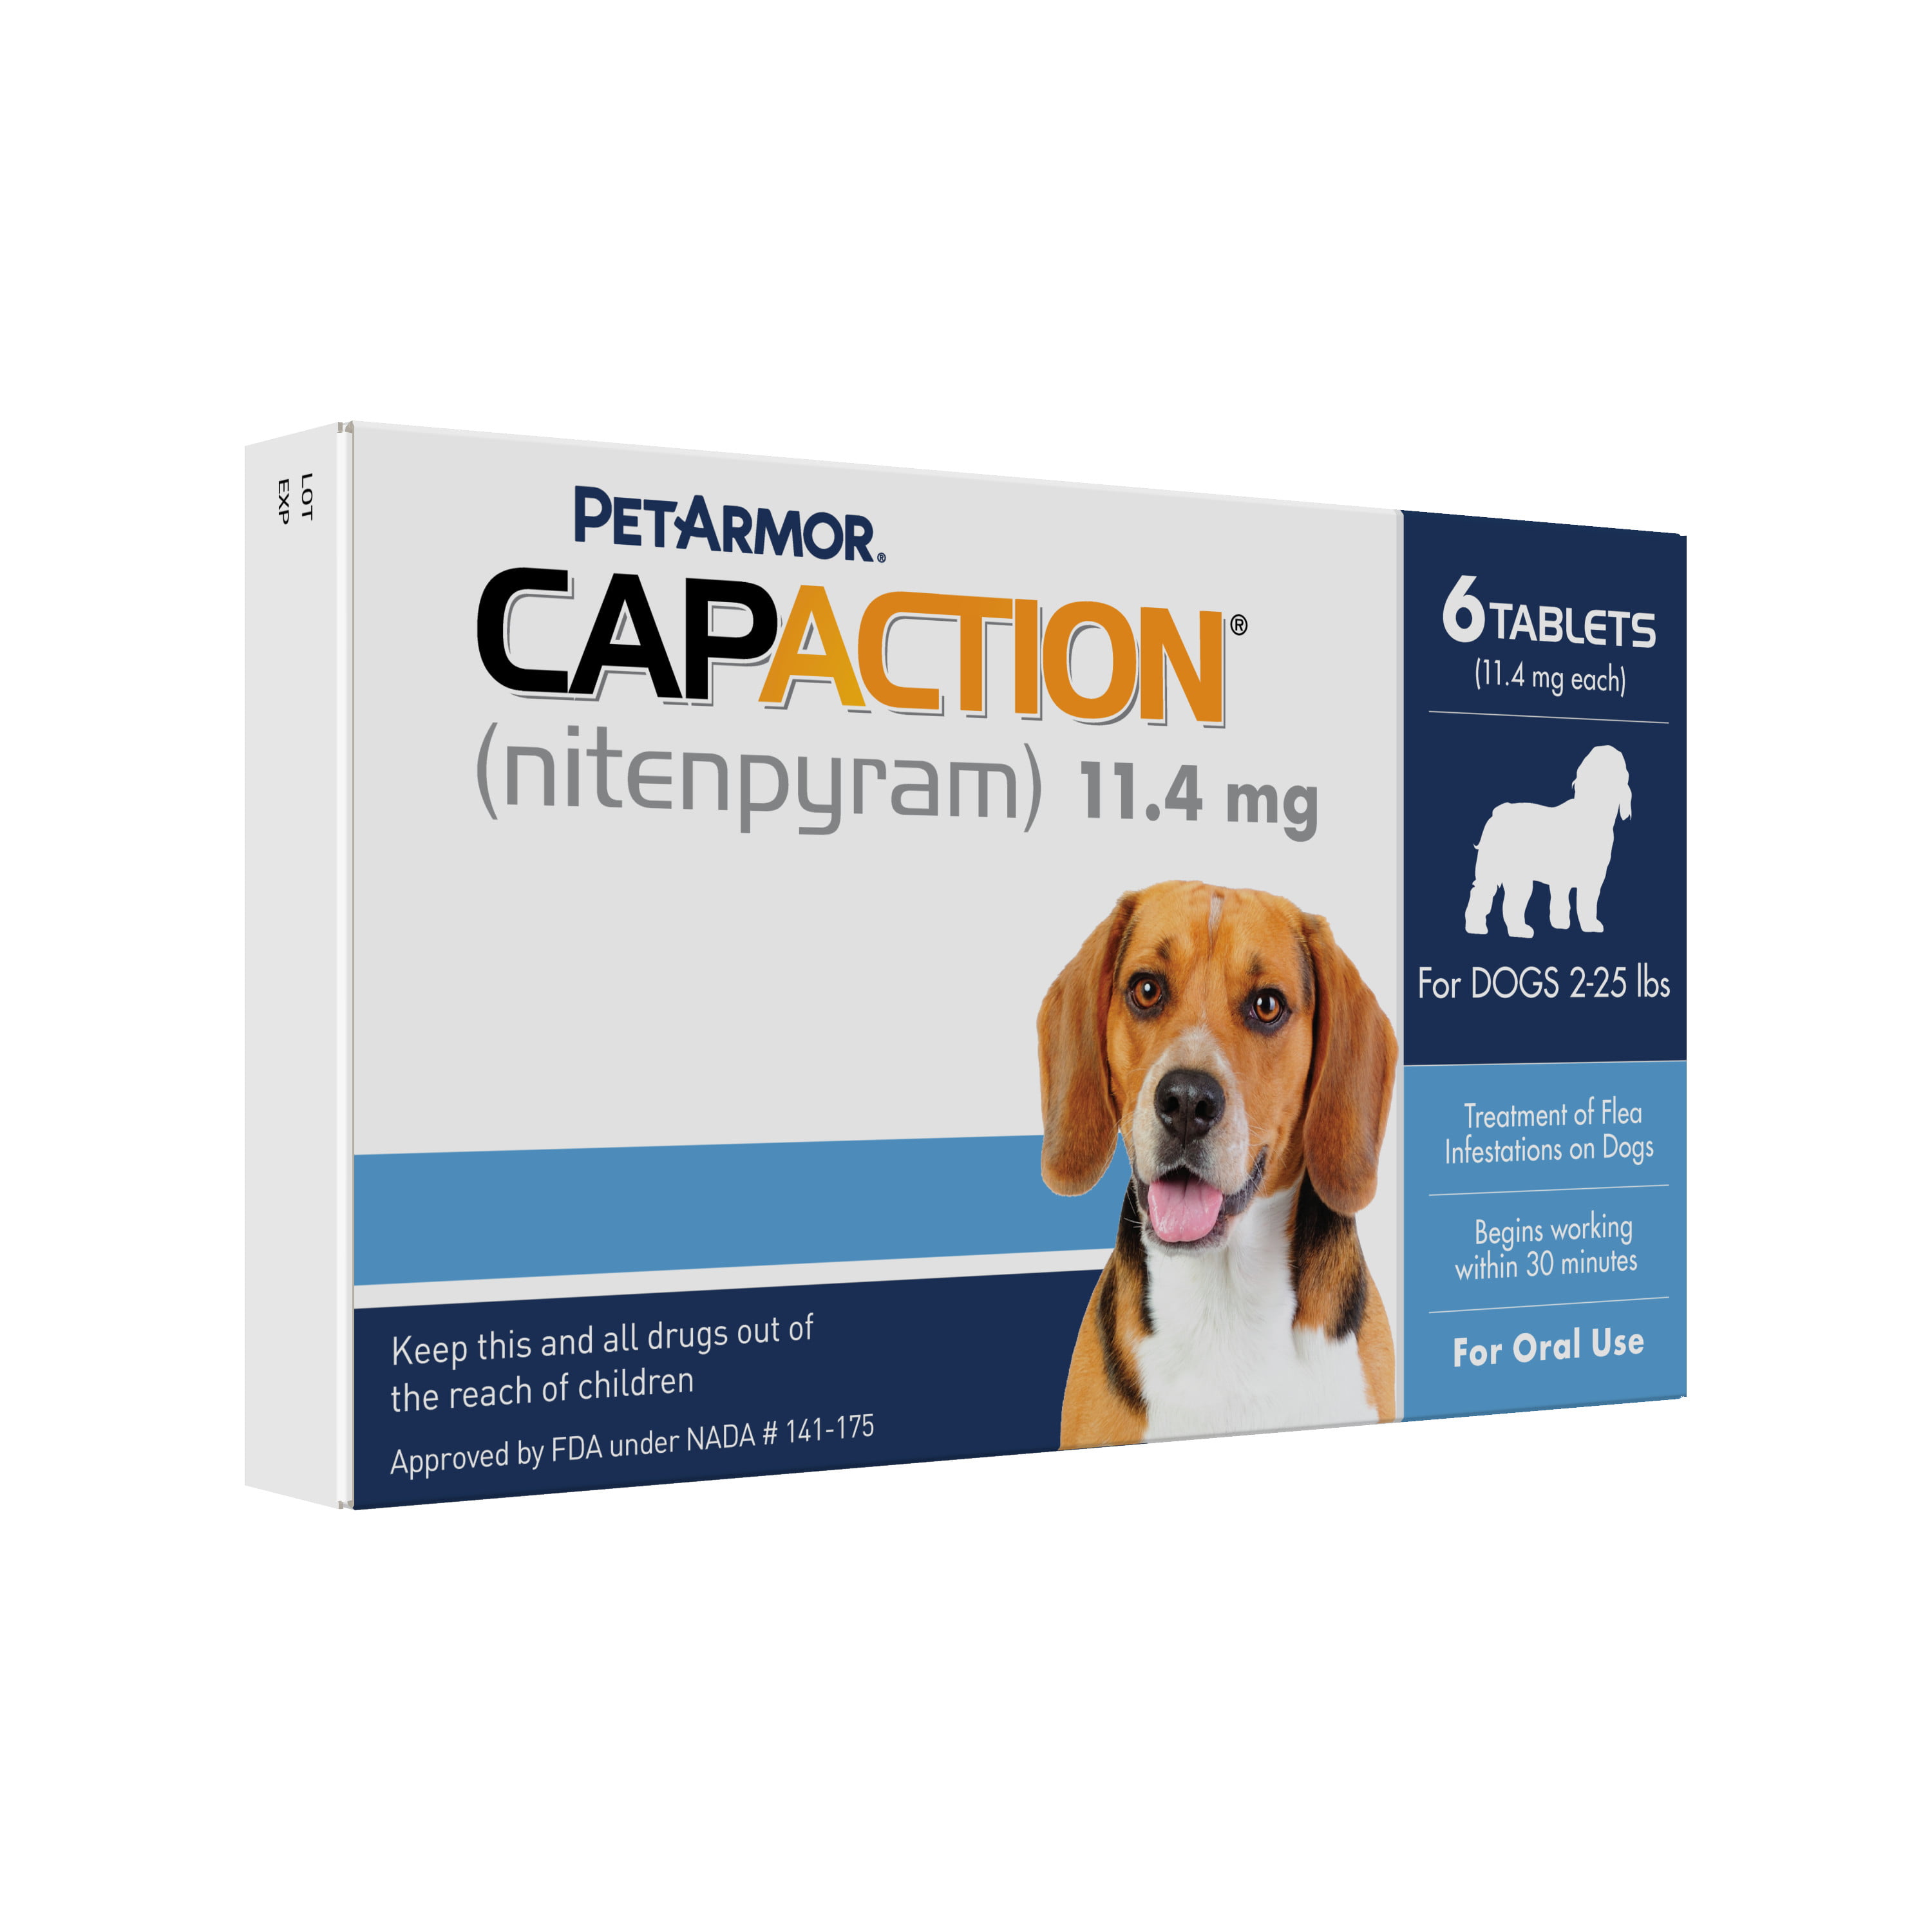 PETARMOR CAPACTION Fast-Acting Oral Flea Treatment for Small Dogs (2-25 lbs),  6 Doses, 11.4 mg - Walmart.com